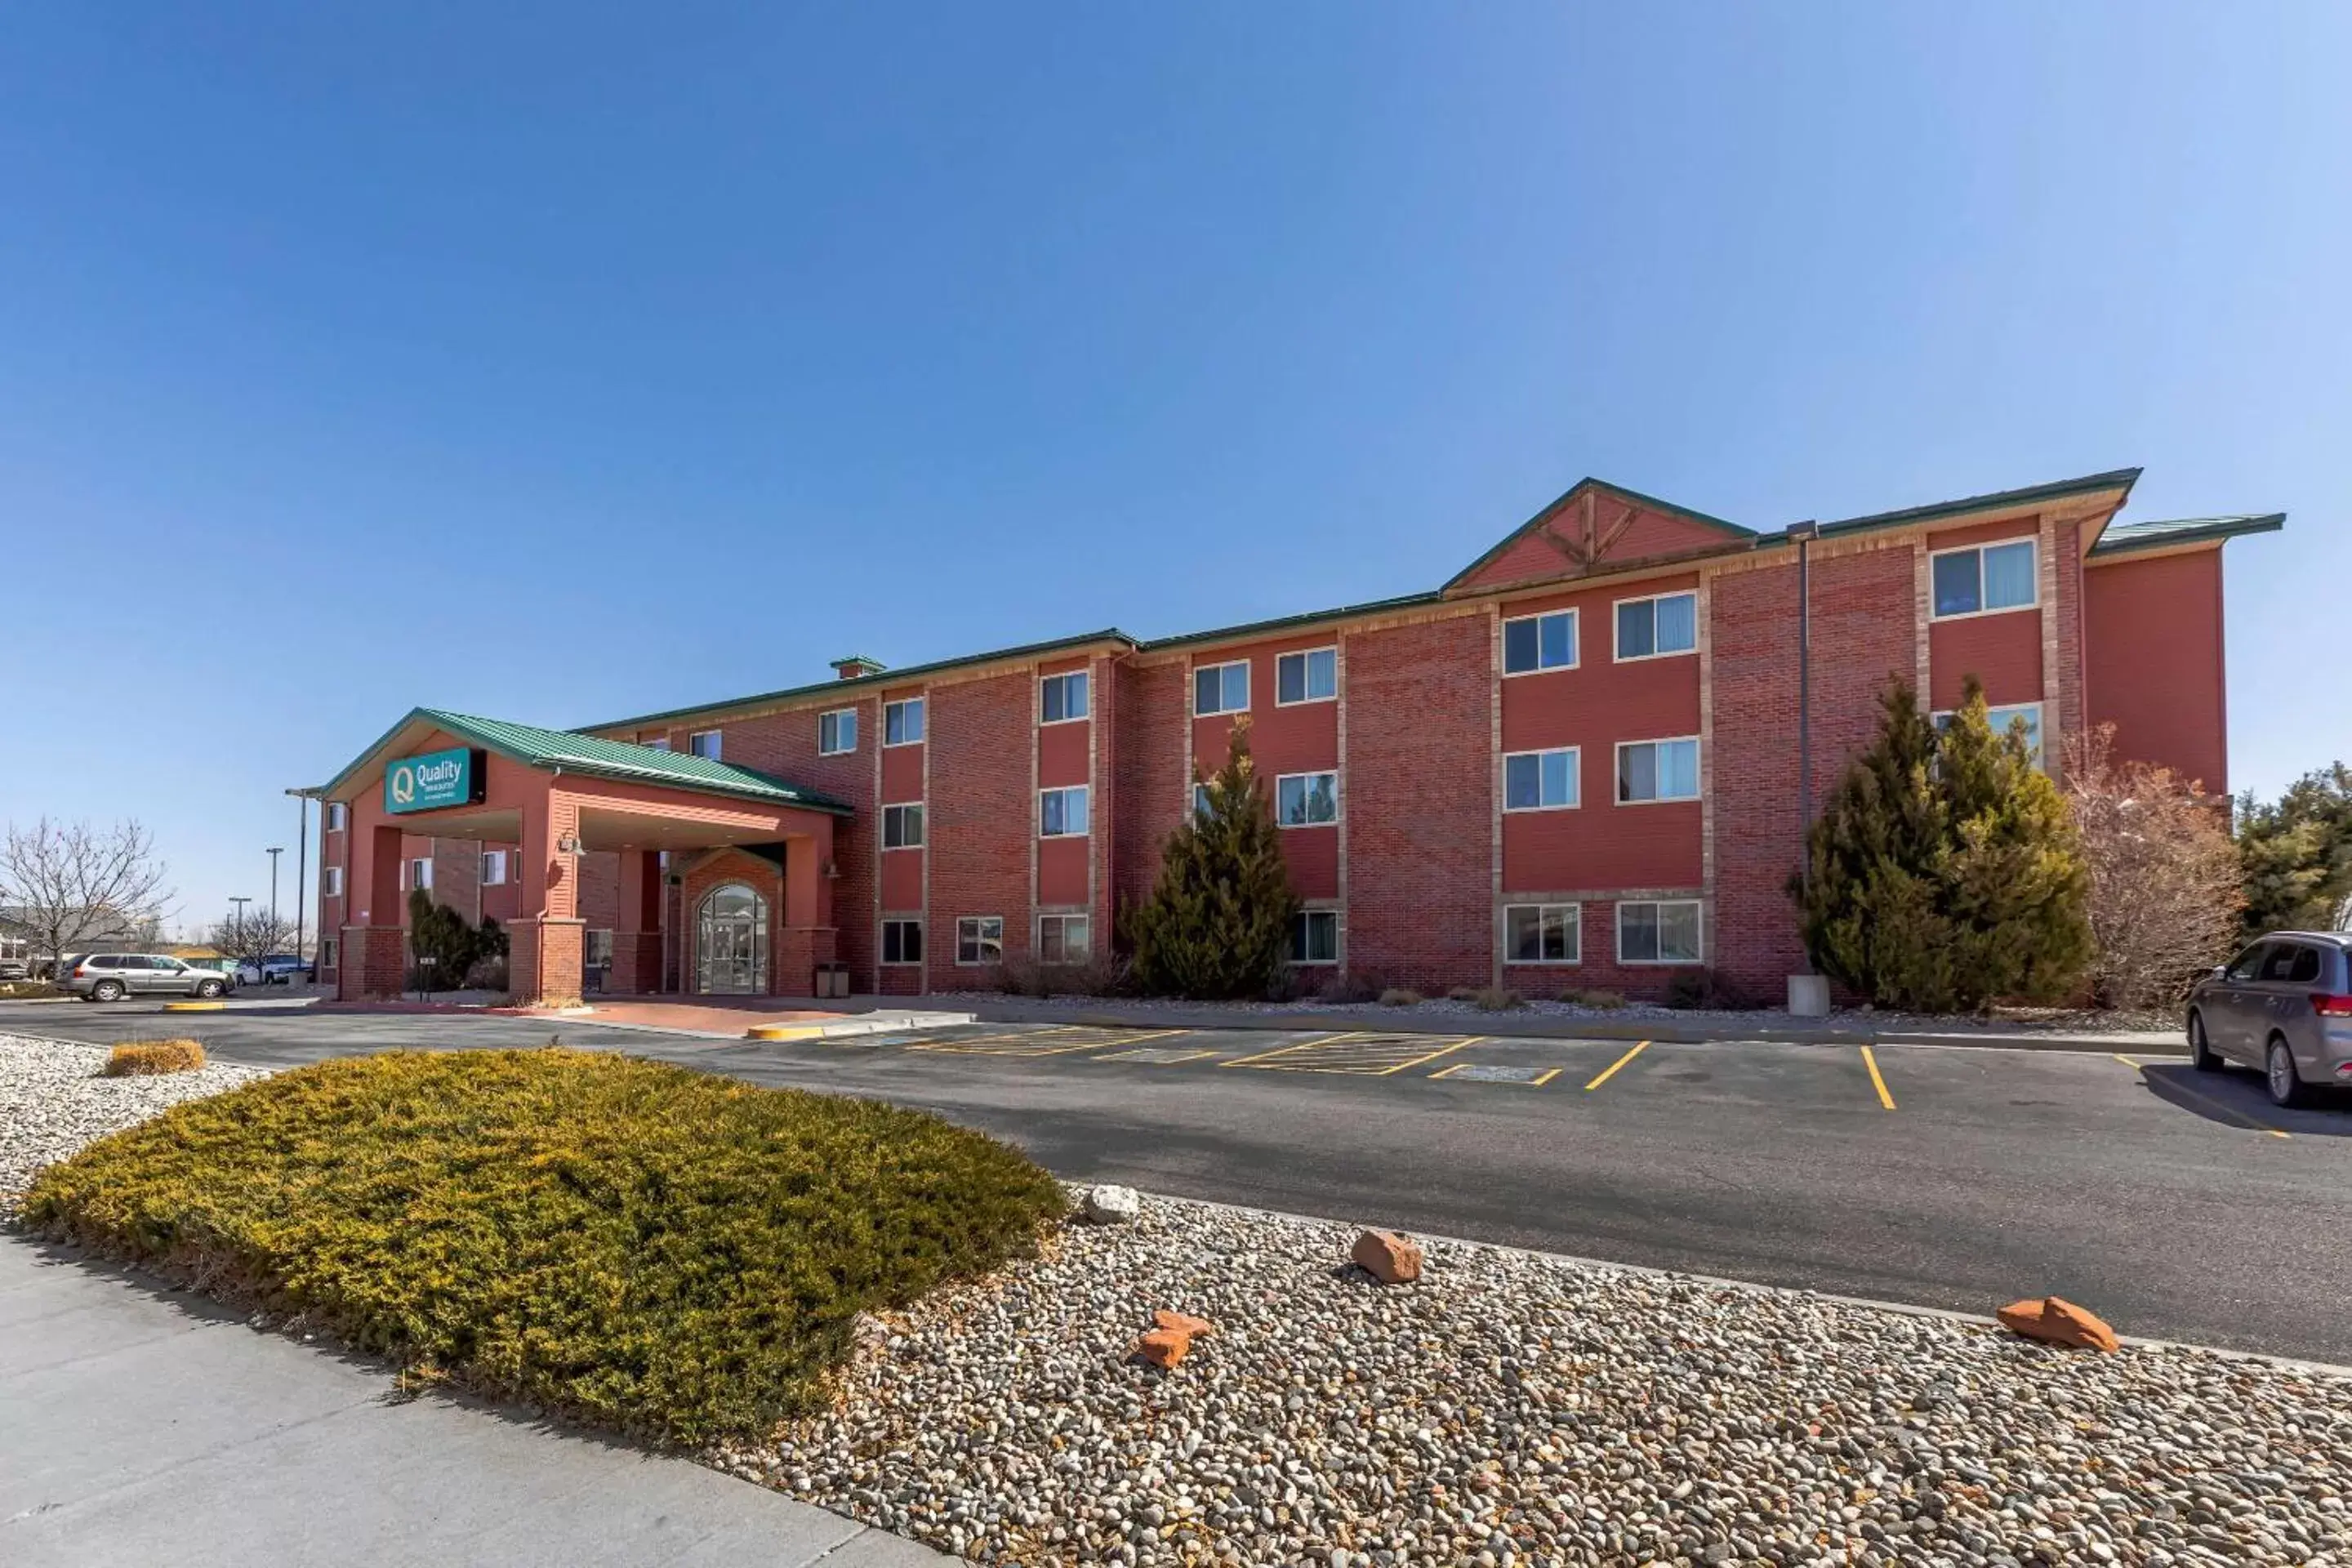 Property Building in Quality Inn & Suites Wellington – Fort Collins